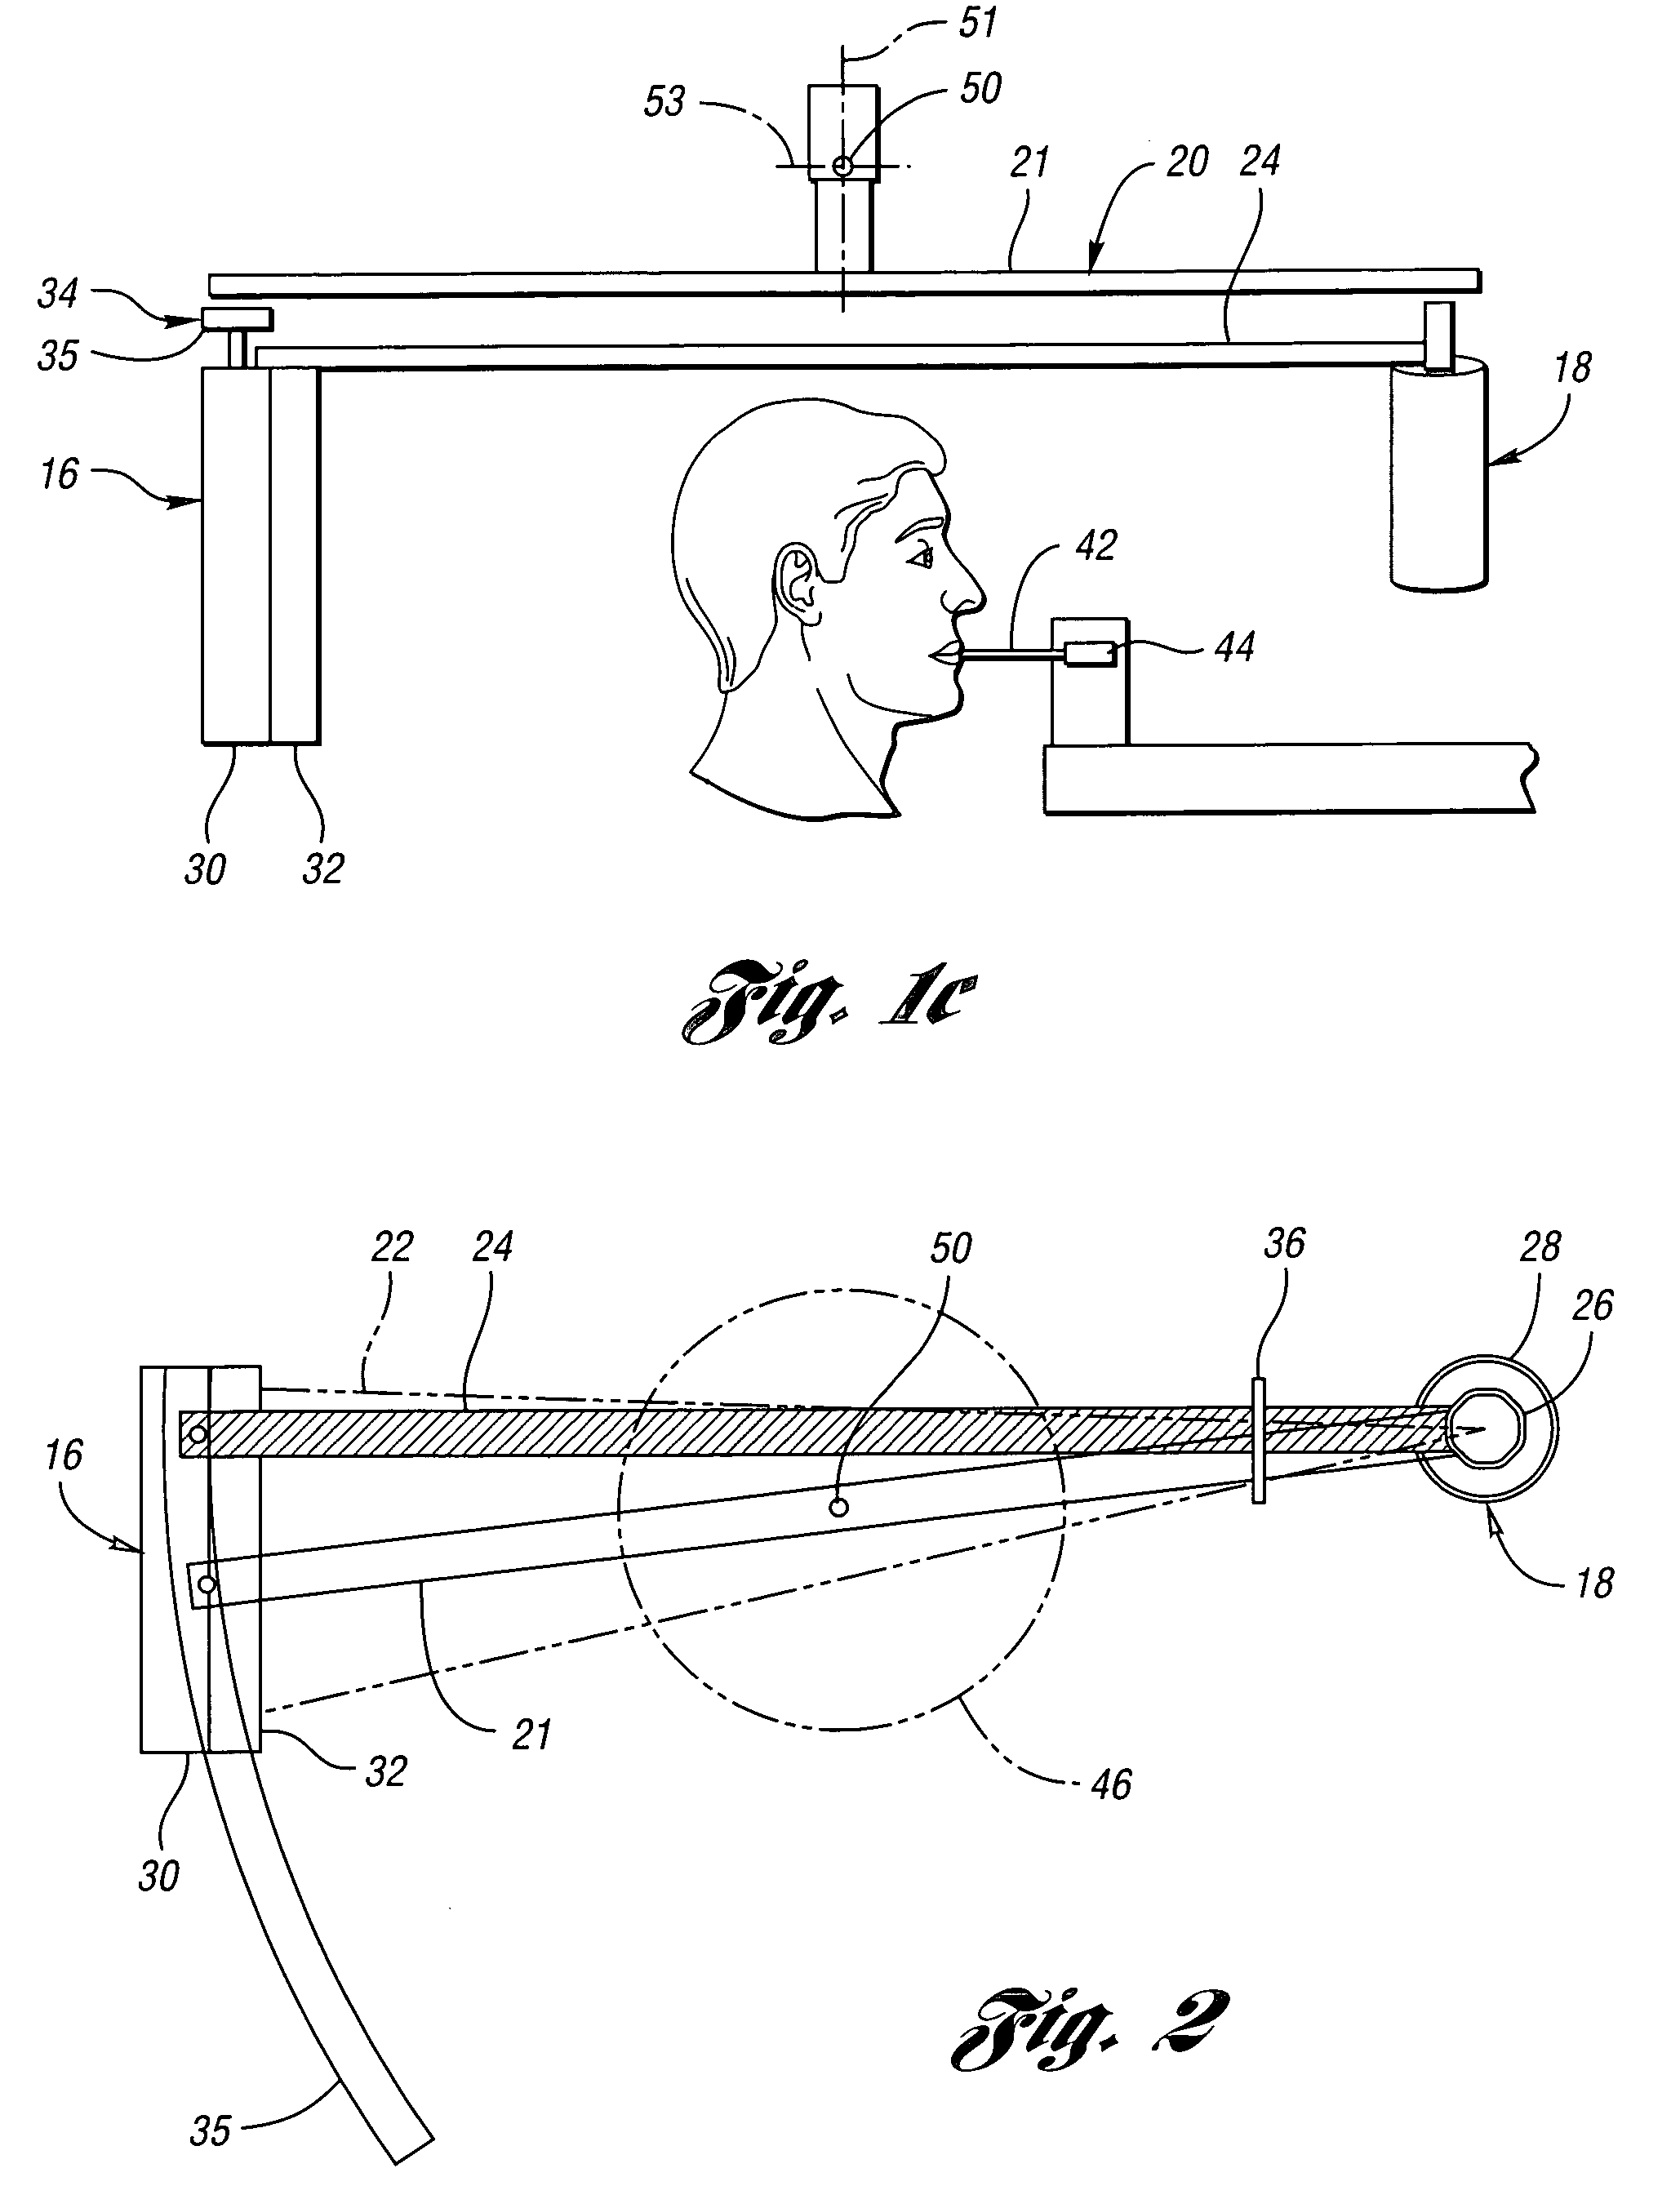 High spatial resolution X-ray computed tomography (CT) method and system